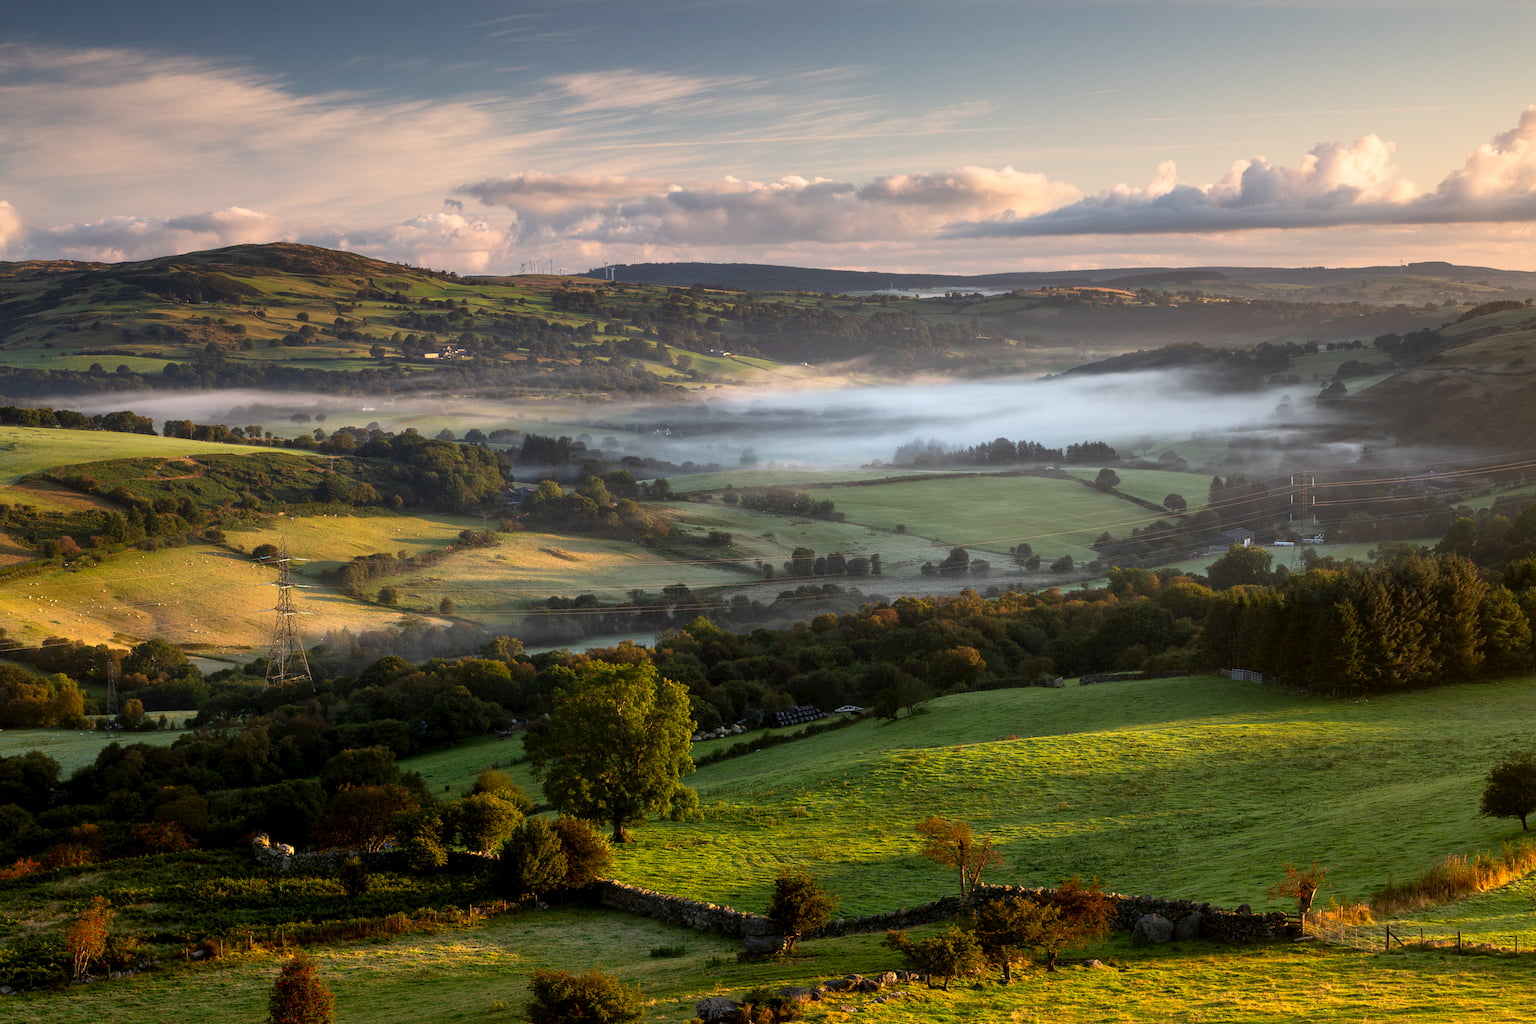 Low lying mist at sunrise in the Cwm Main valley in North Wales.